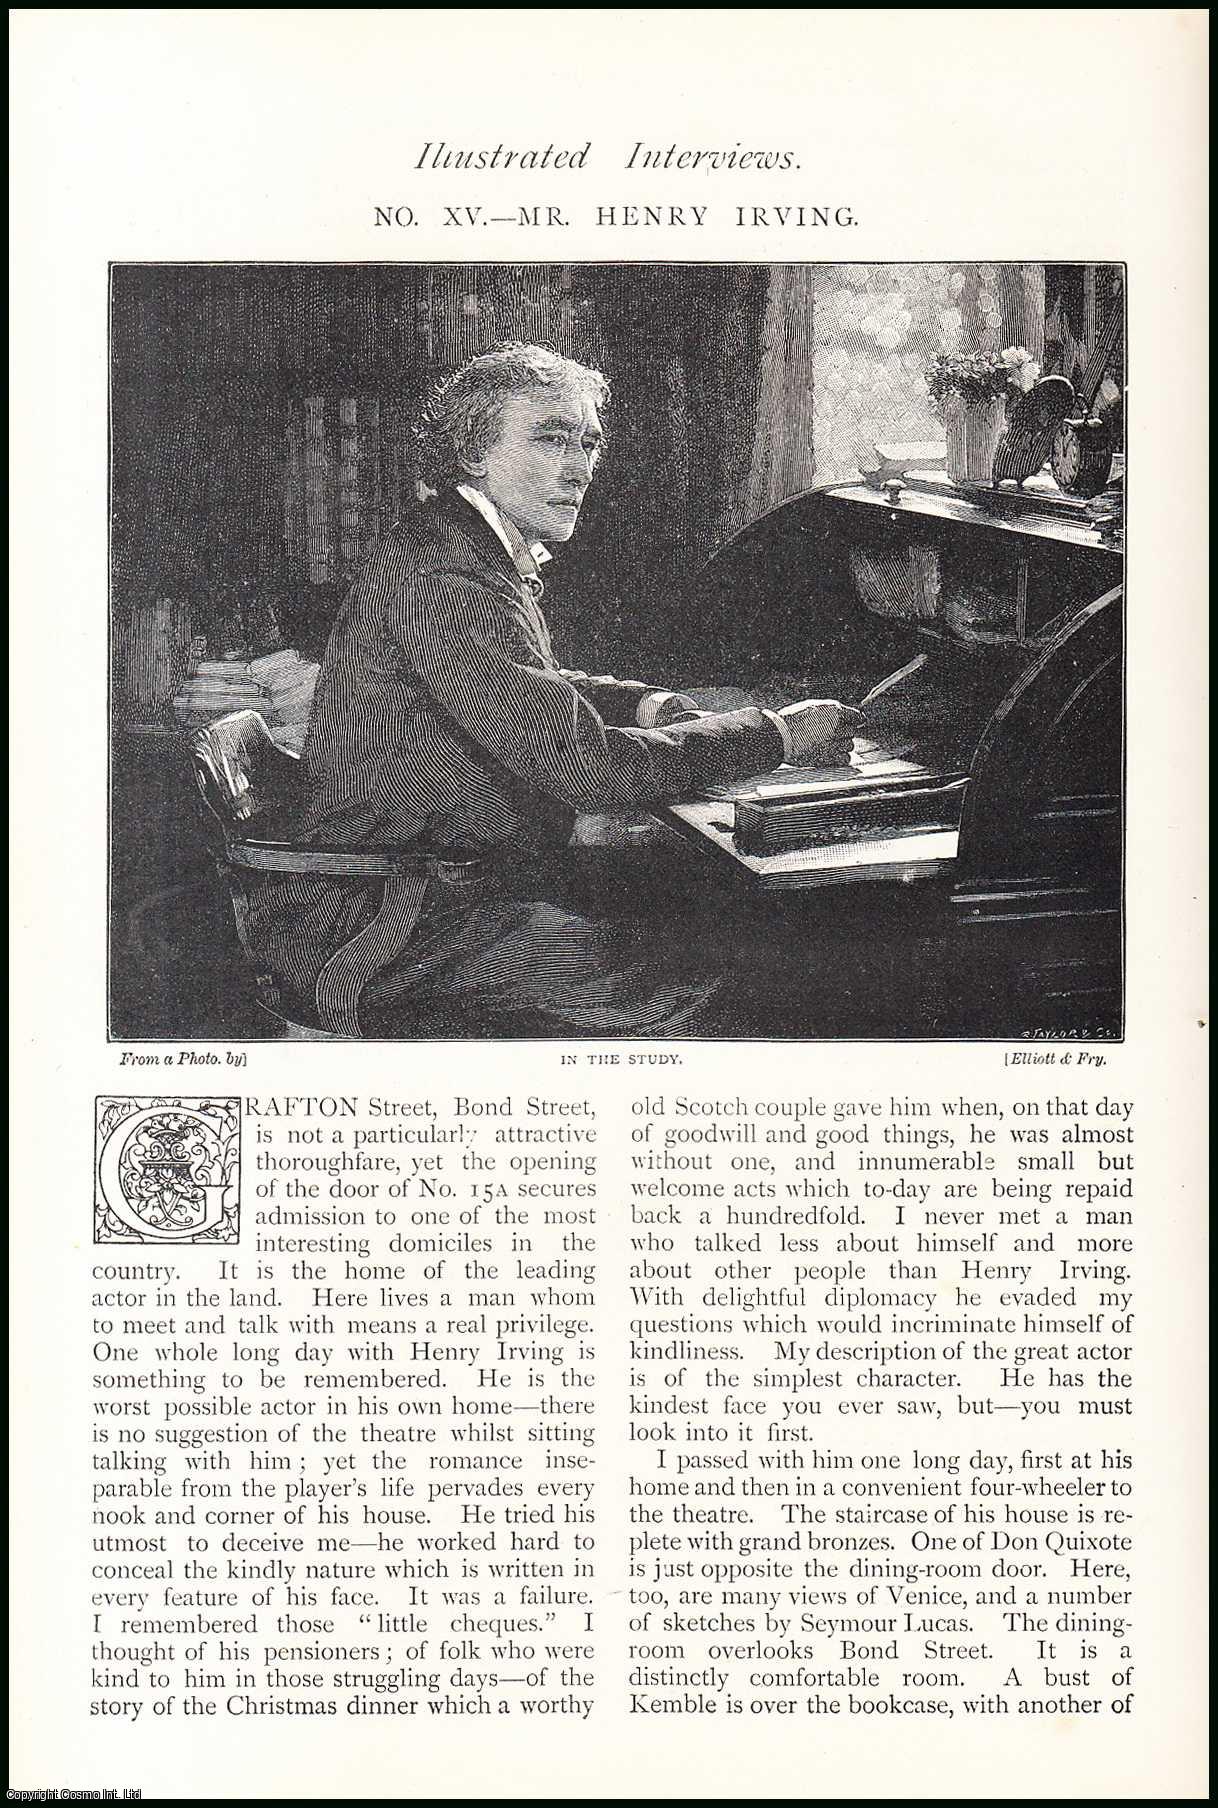 Harry How - Mr. Henry Irving, English Stage Actor. Illustrated Interviews. An original article from The Strand Magazine, 1892.